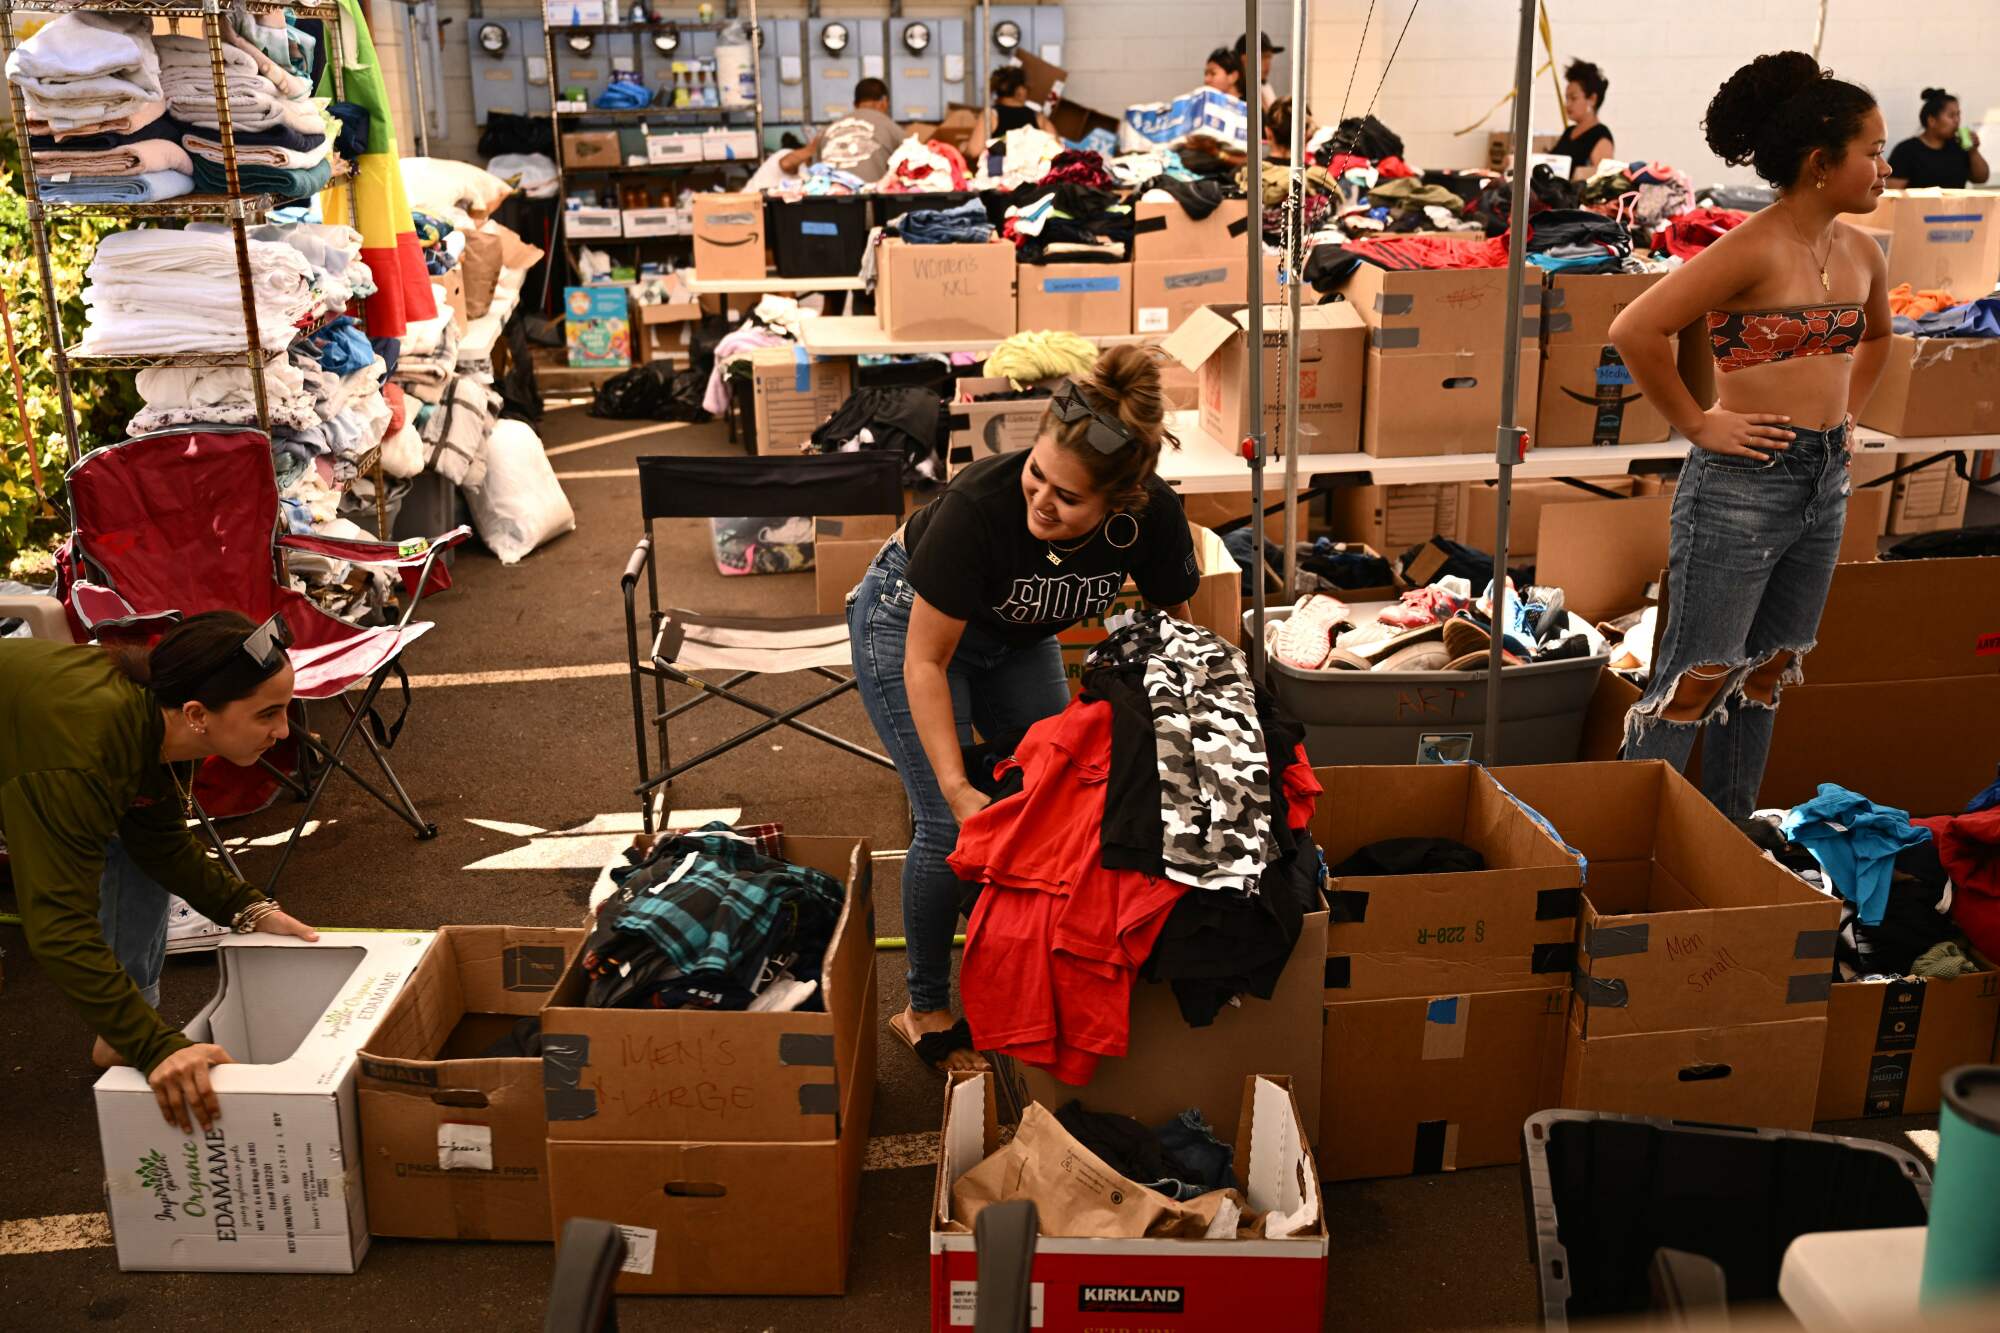 A woman bends over a brown box to pull out clothing, Behind her, brown boxes with goods fill a warehouse space.